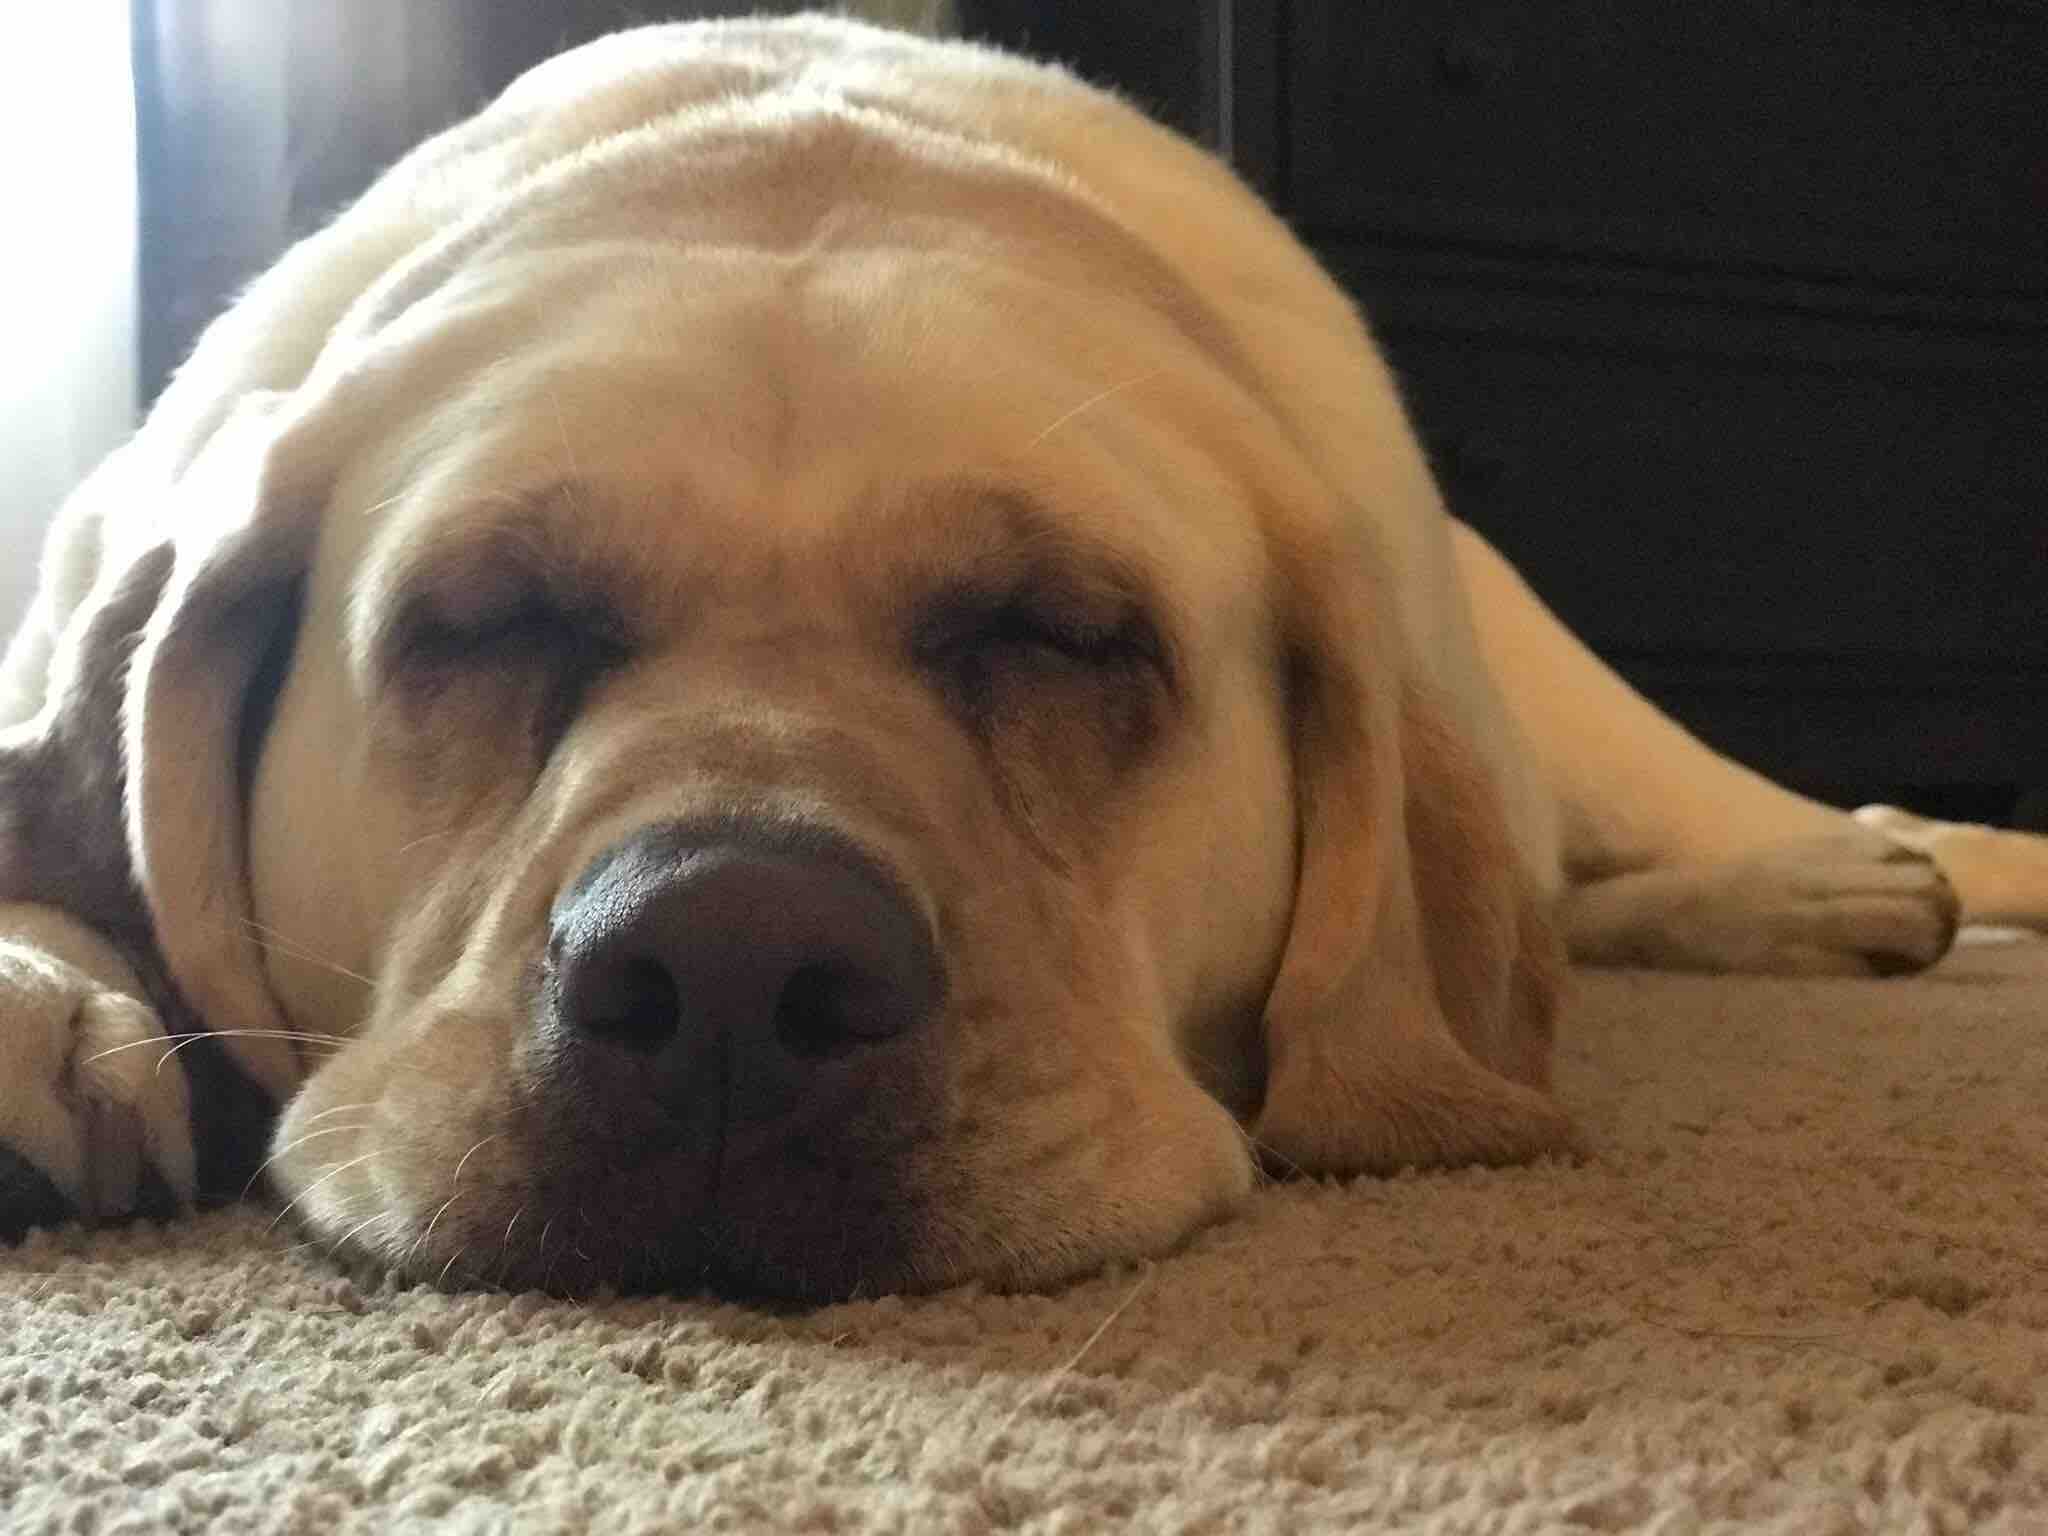 Sleeping lab, one of Dr. Carrie's patients